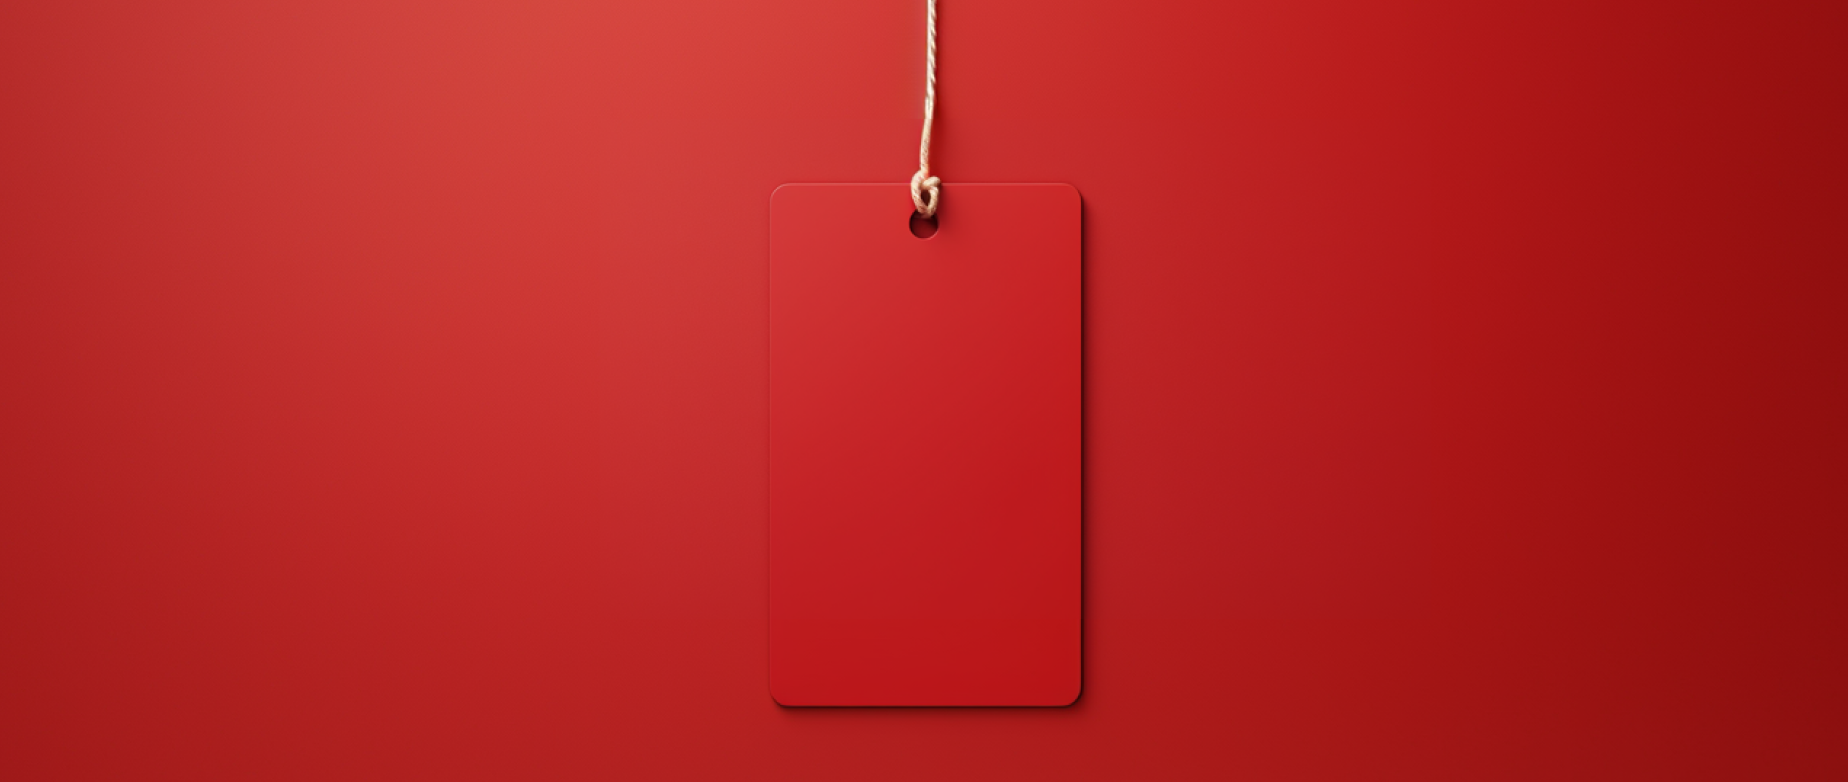 A blank red label on a red background, representing private label products.